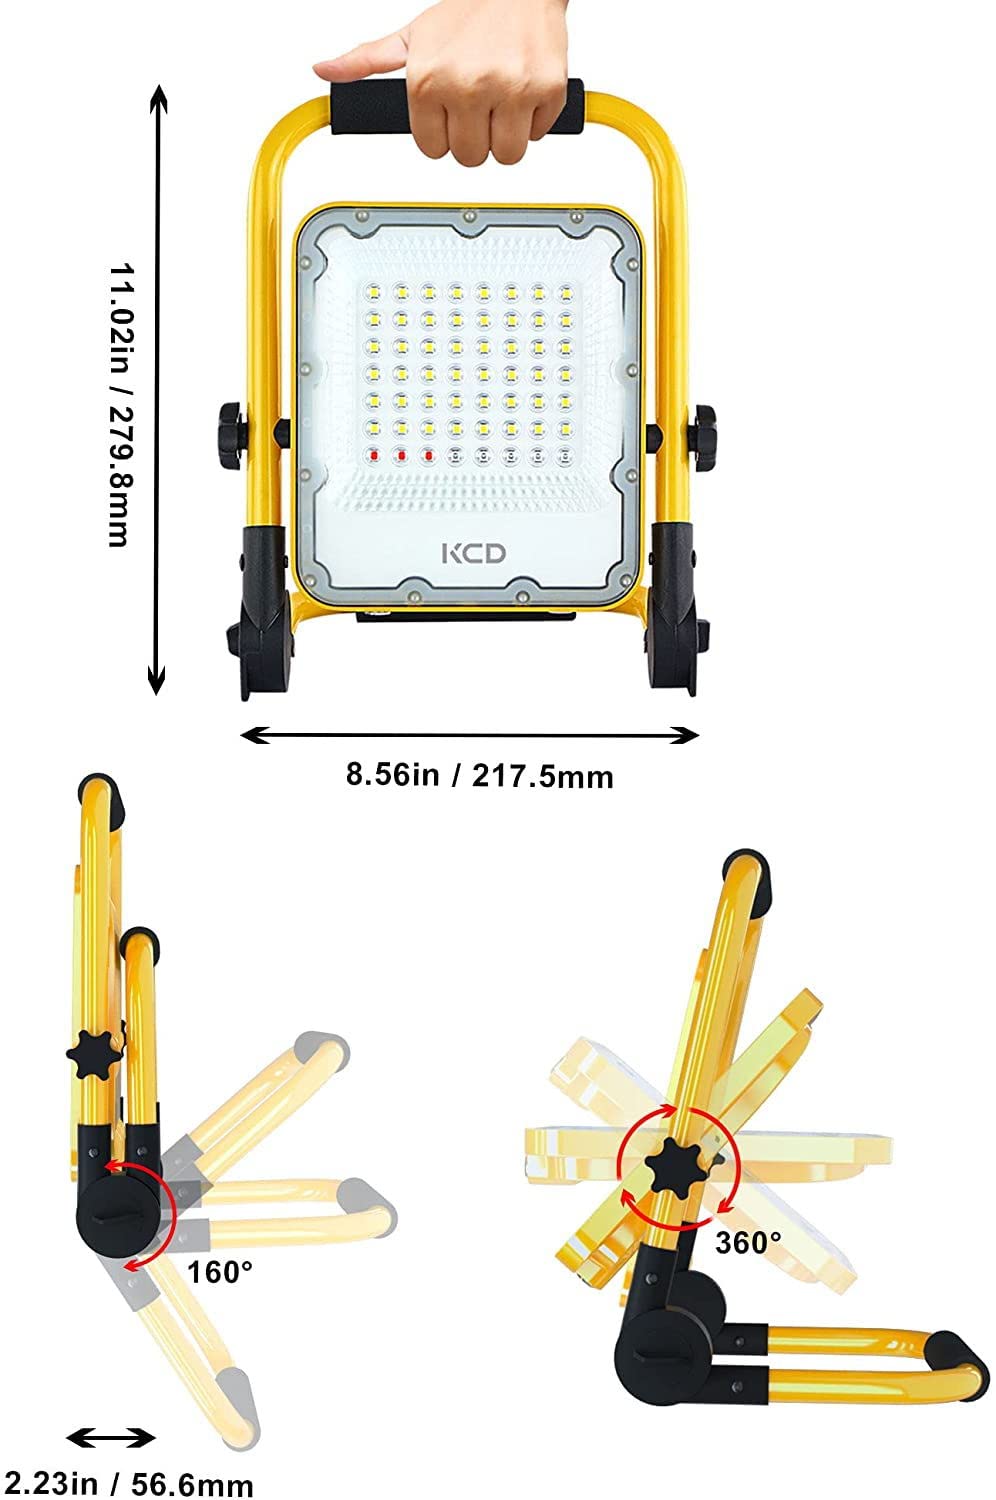 Rechargeable LED Work Light, KCD 30W 3000LM Adjustable Flood Light with Stand IP65 Waterproof Outdoor Construction Job Site Working Light for Garage Workshop Car,Camping, Outdoor Lighting - Like New